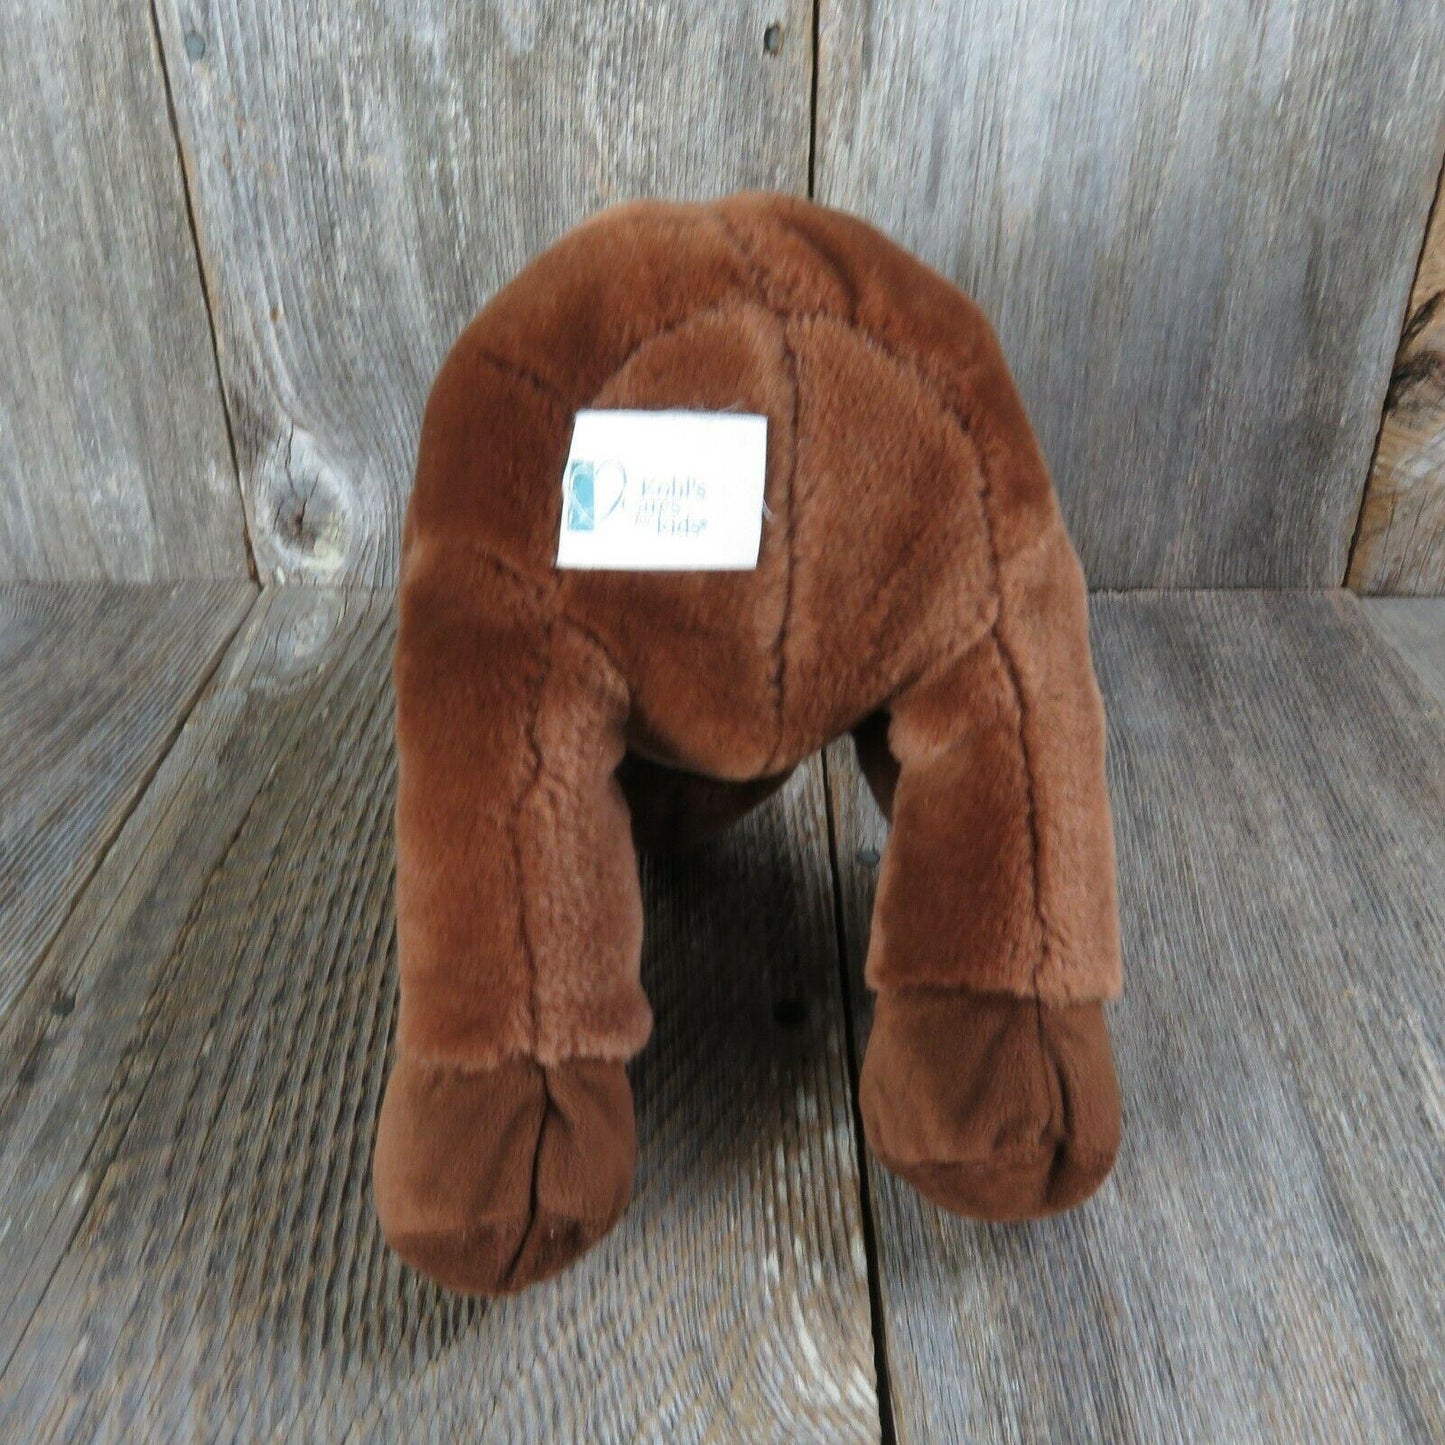 If You Give a Moose A Muffin Plush Brown Stuffed Animal Kohls Cares